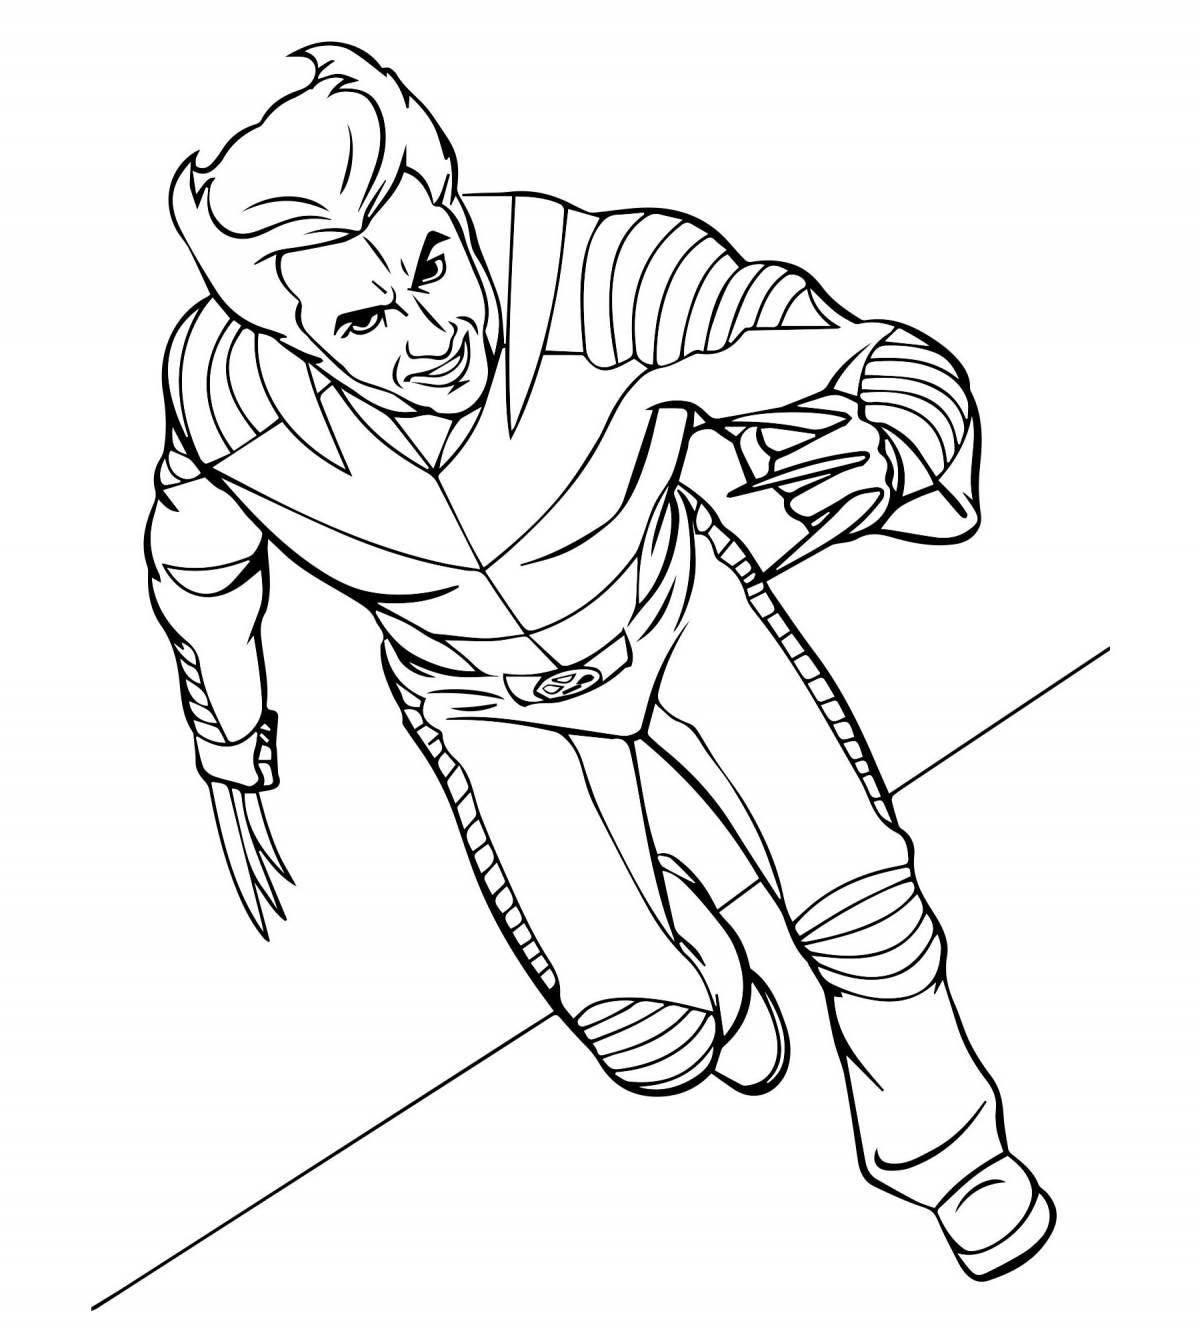 Adorable marvel coloring book for boys